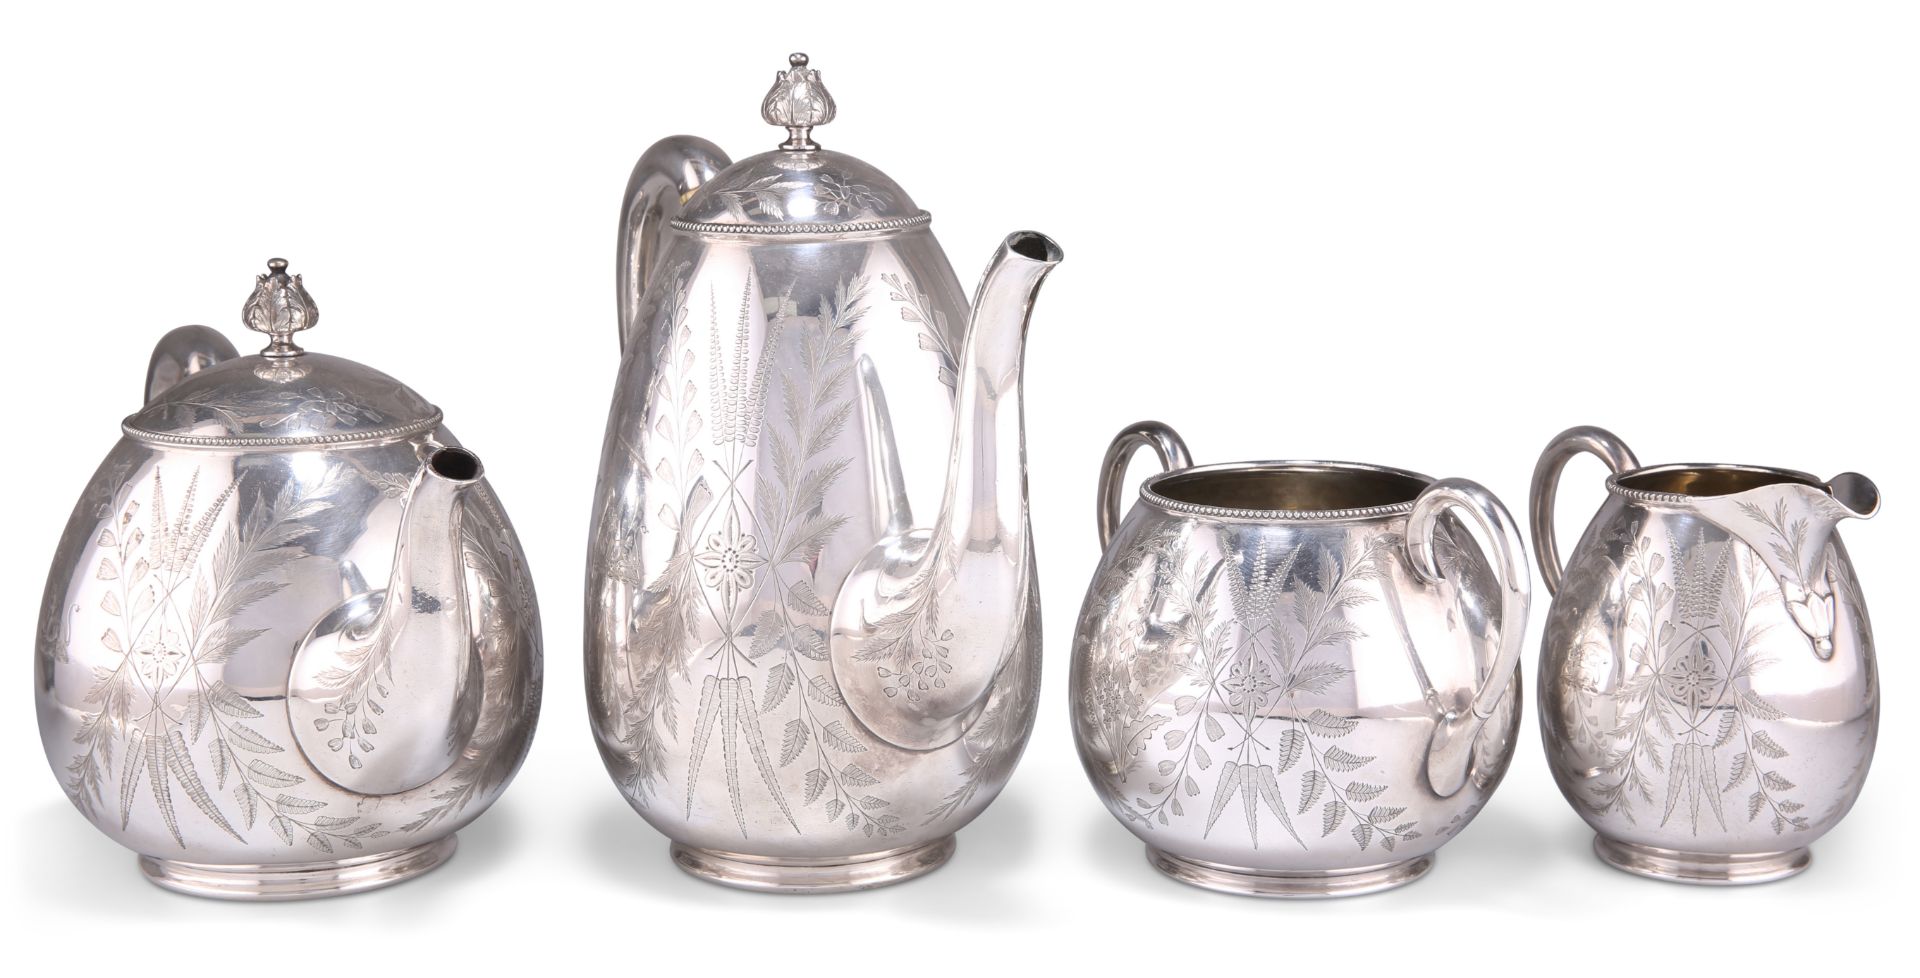 A VICTORIAN AESTHETIC MOVEMENT SILVER-PLATED TEA AND COFFEE SERVICE